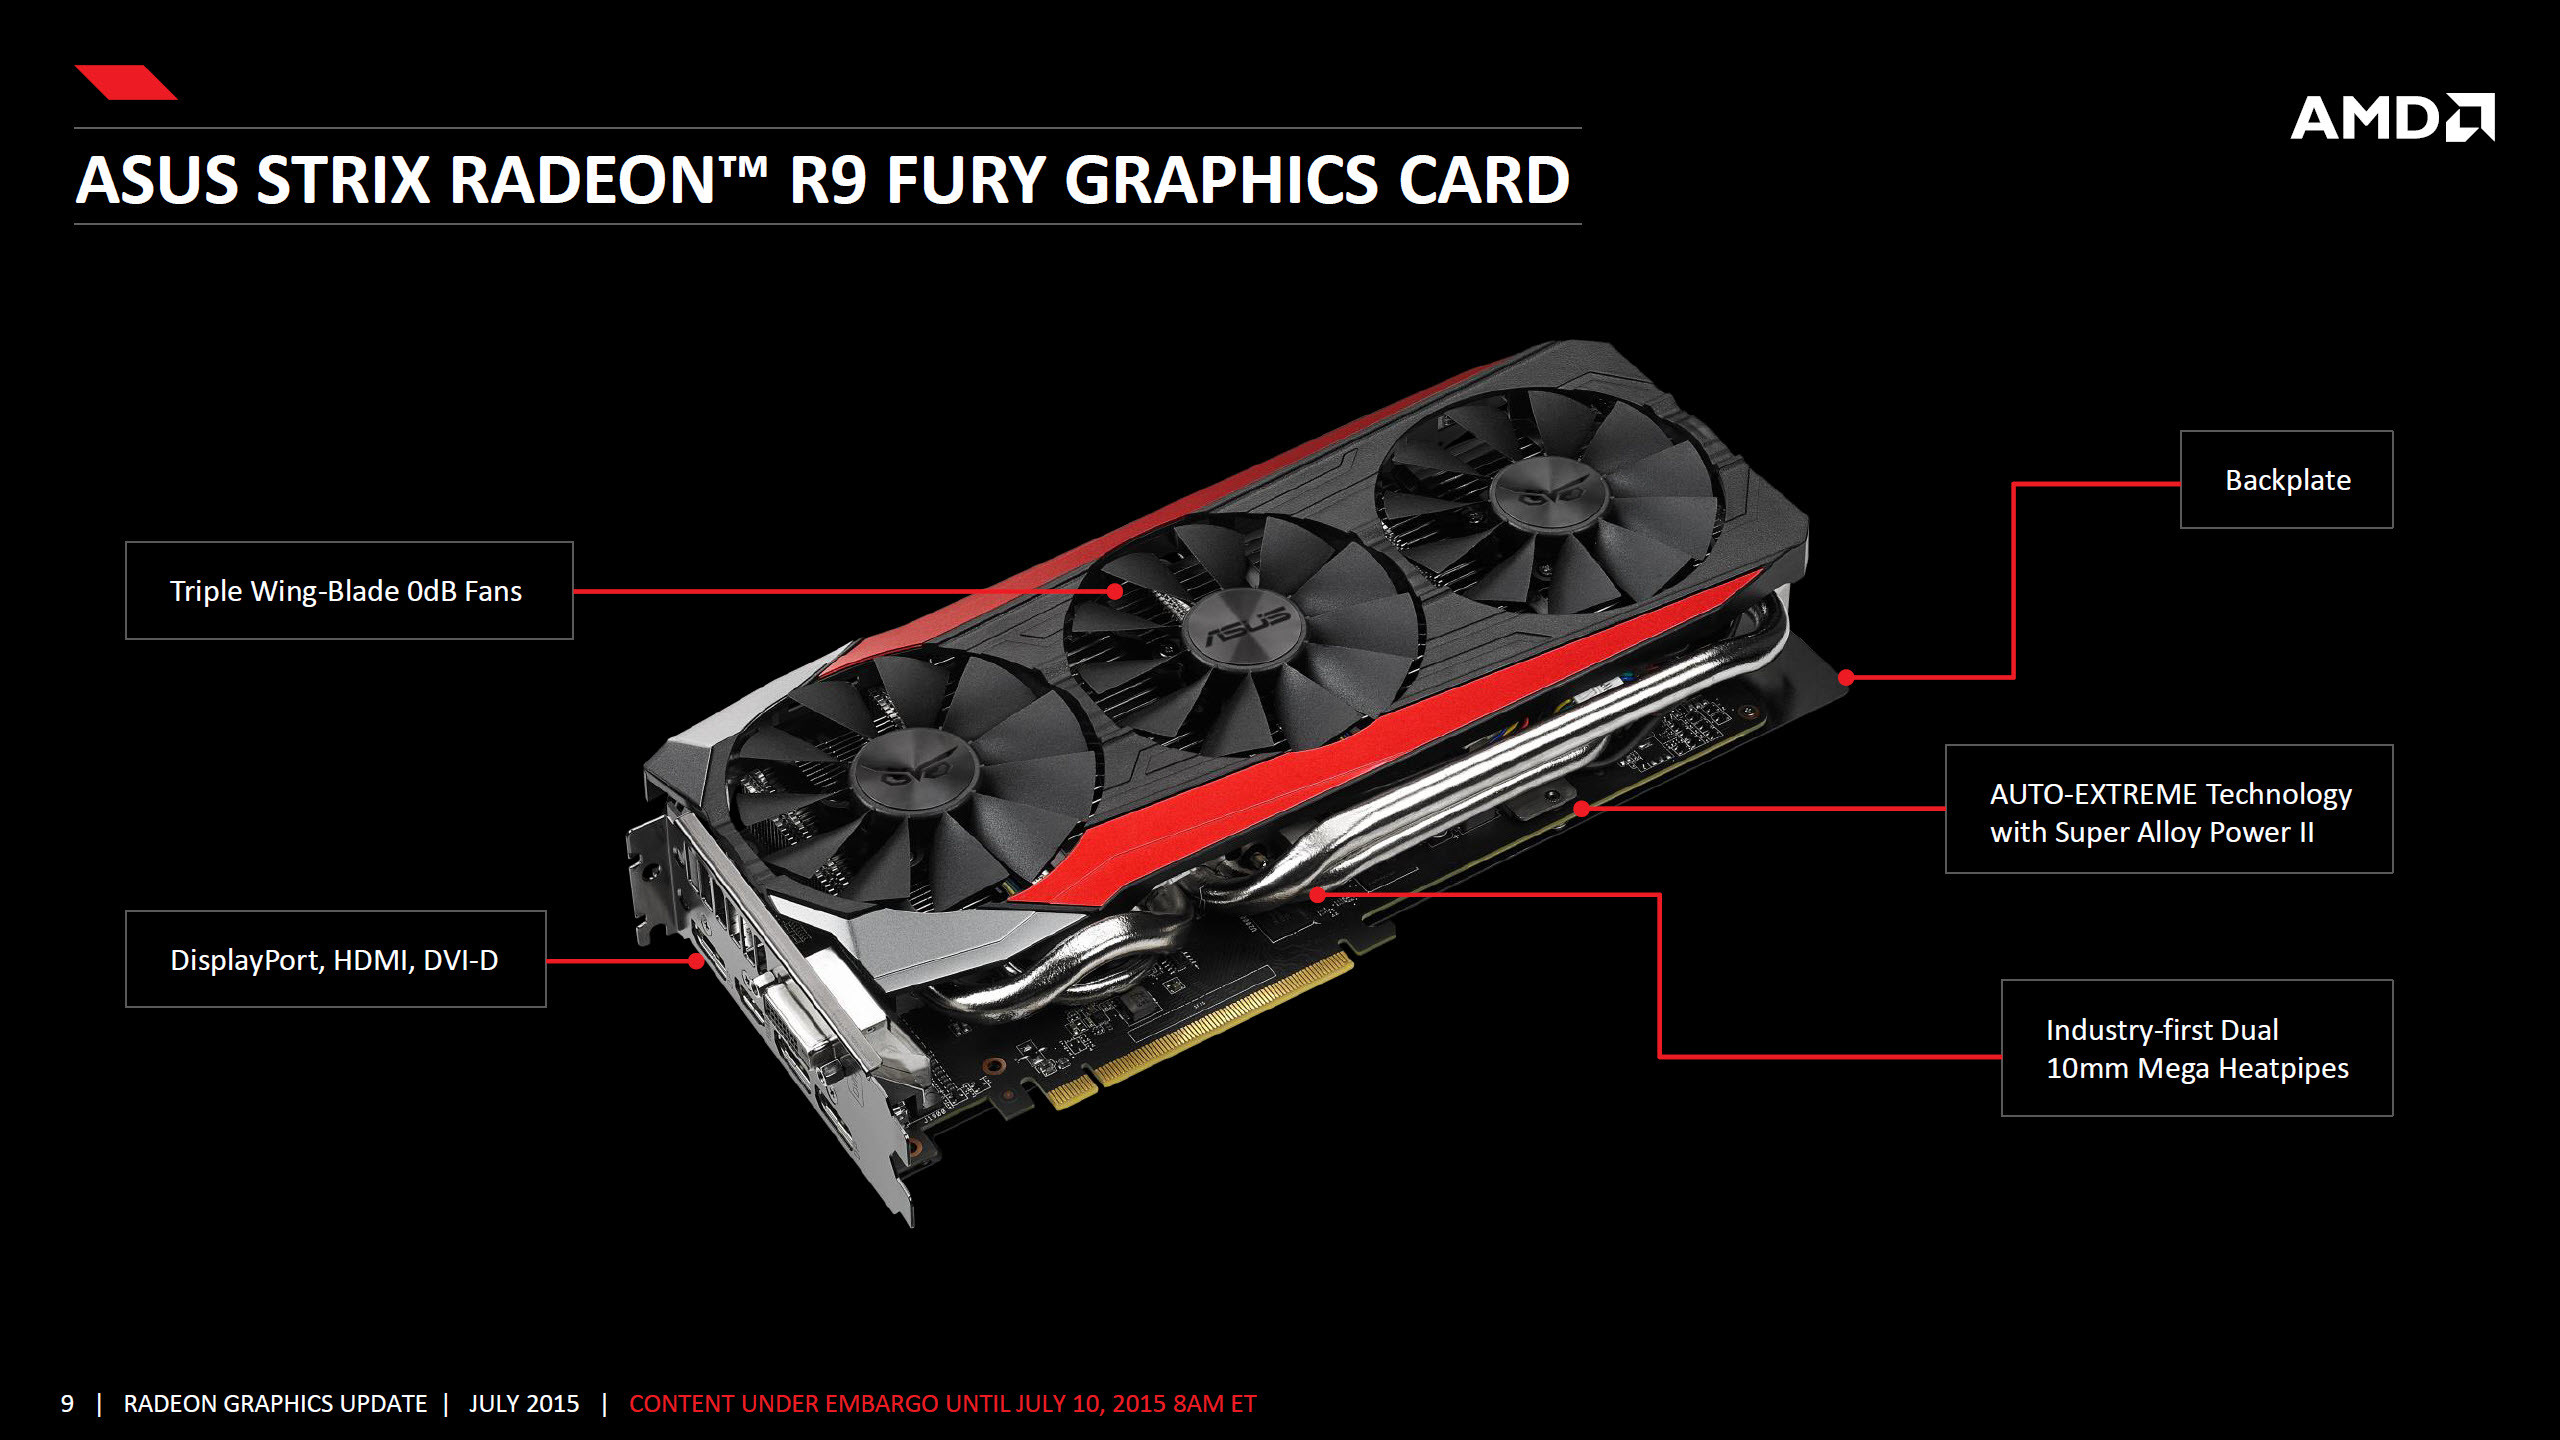 AMD Radeon R9 Fury With Fiji Pro GPU Officially Launched .